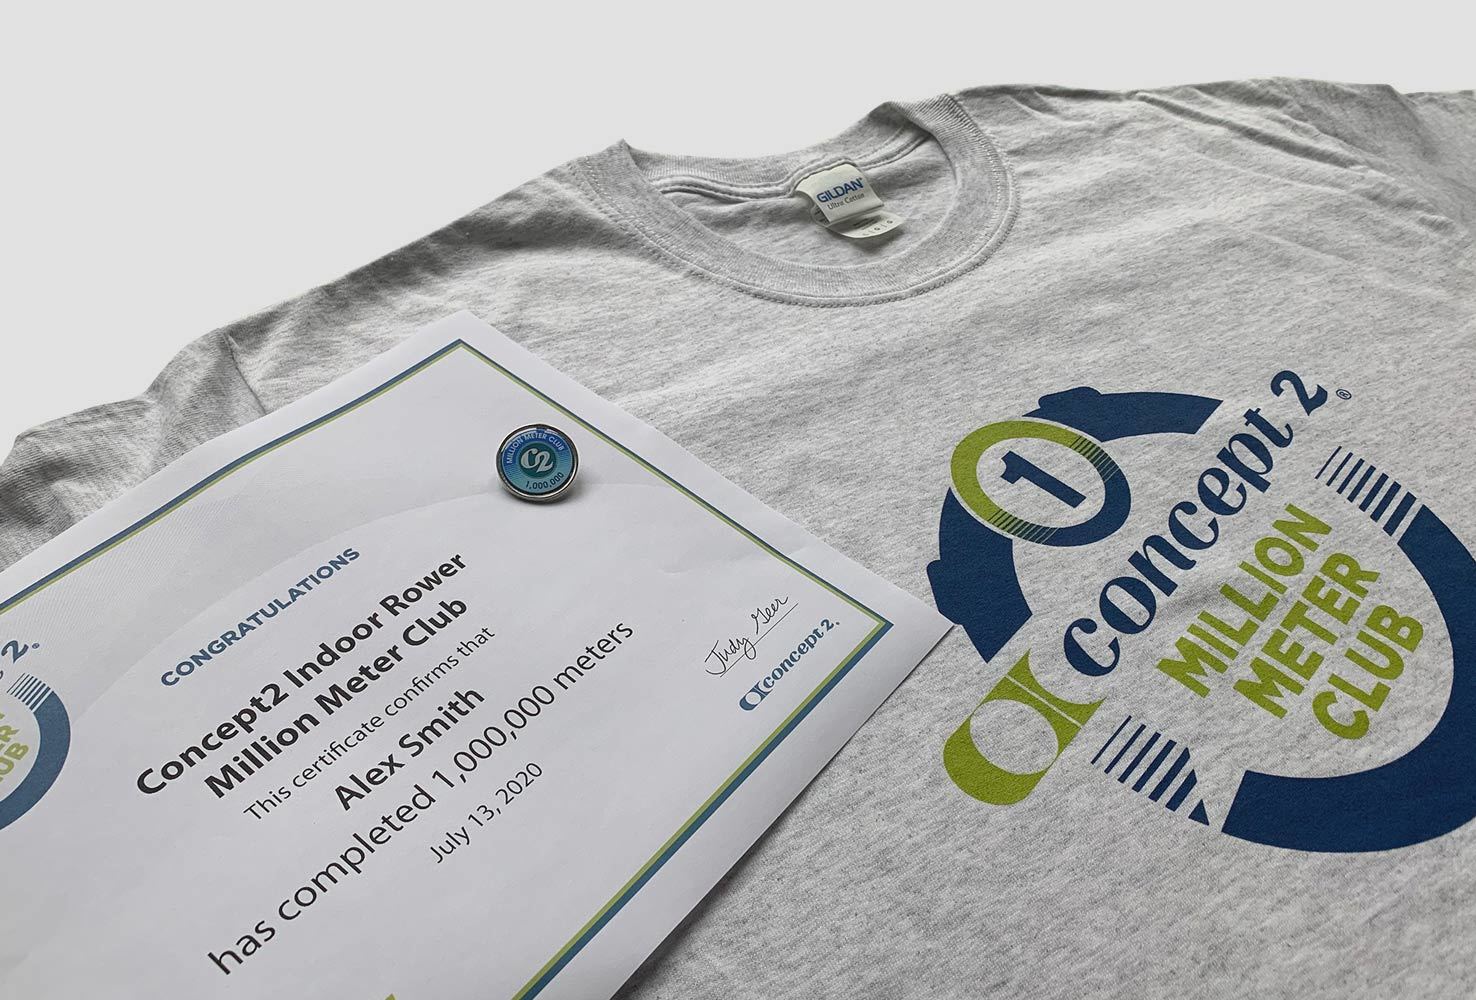 Concept2 Million Meter Club t-shirt and certificate